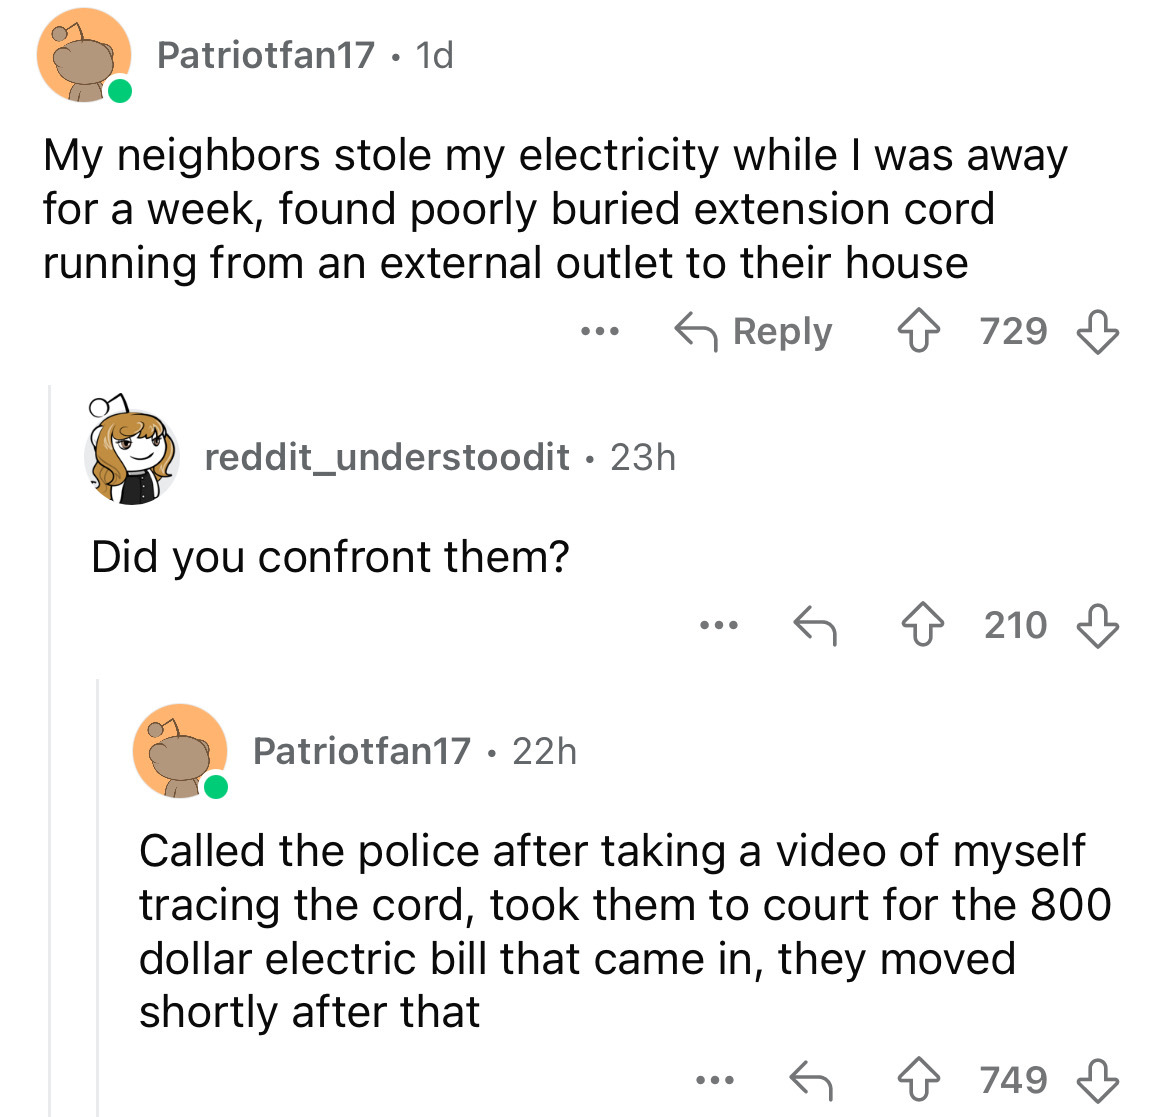 screenshot - Patriotfan17 1d . My neighbors stole my electricity while I was away for a week, found poorly buried extension cord running from an external outlet to their house ... reddit_understoodit 23h Did you confront them? 729 210 Patriotfan17 22h Cal